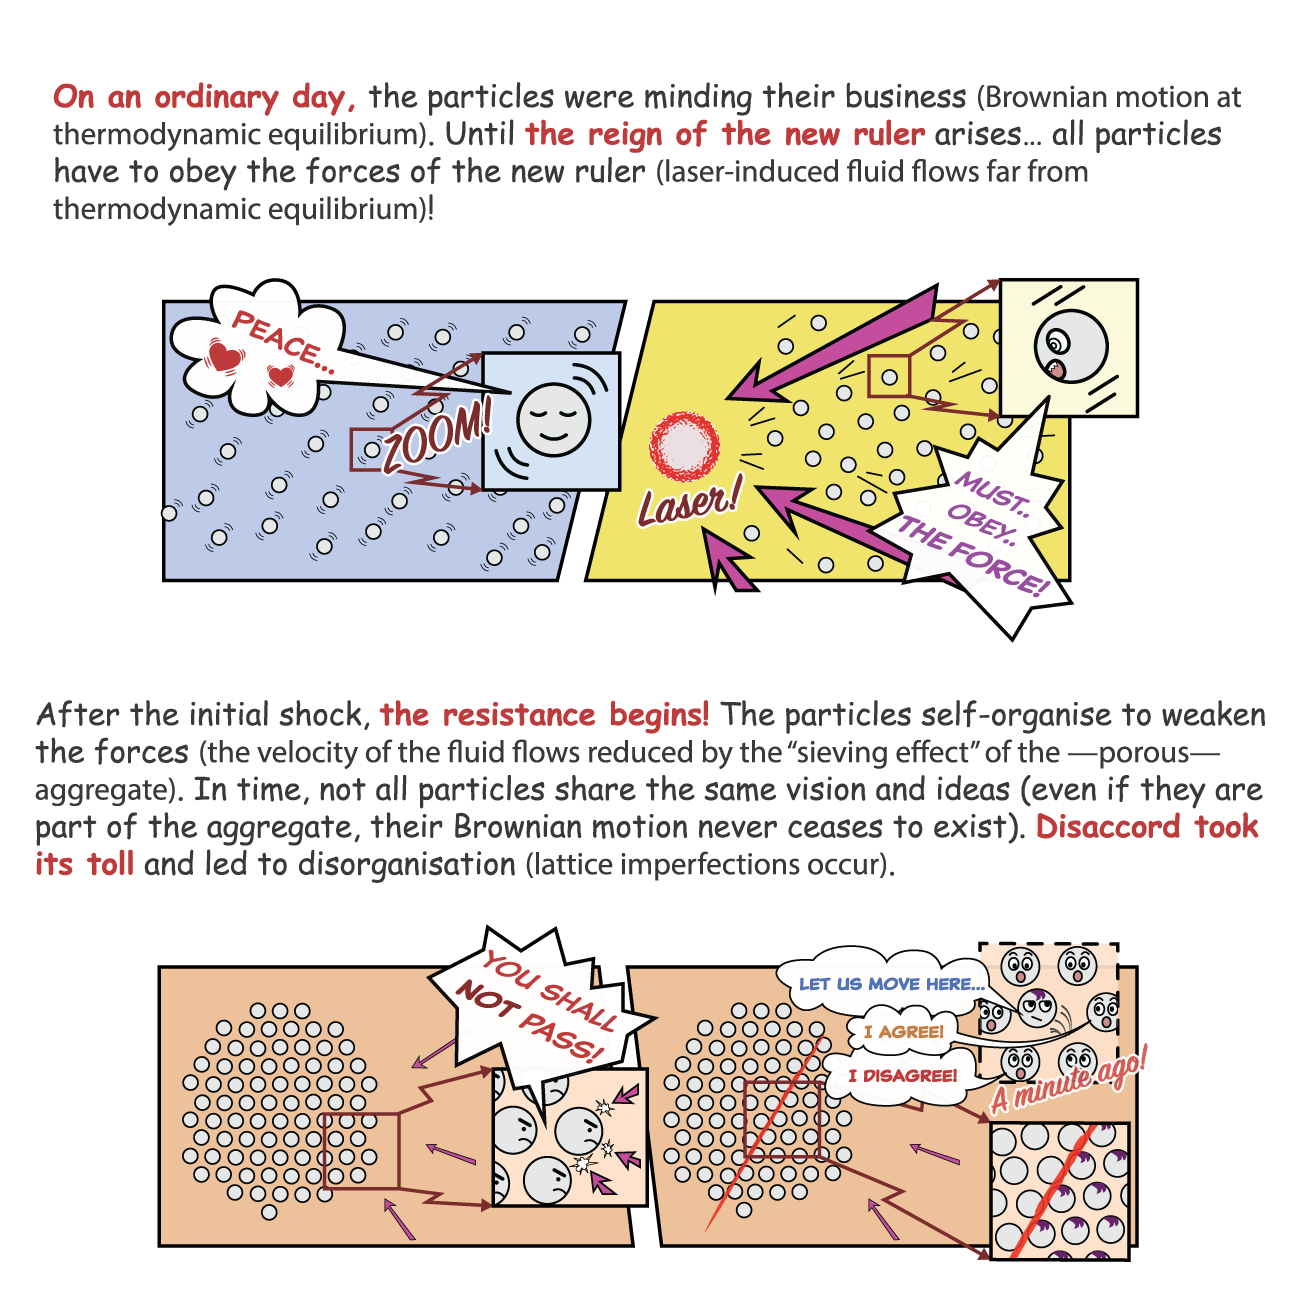 A comic book–style illustration of how particles self-organize when a laser is introduced.